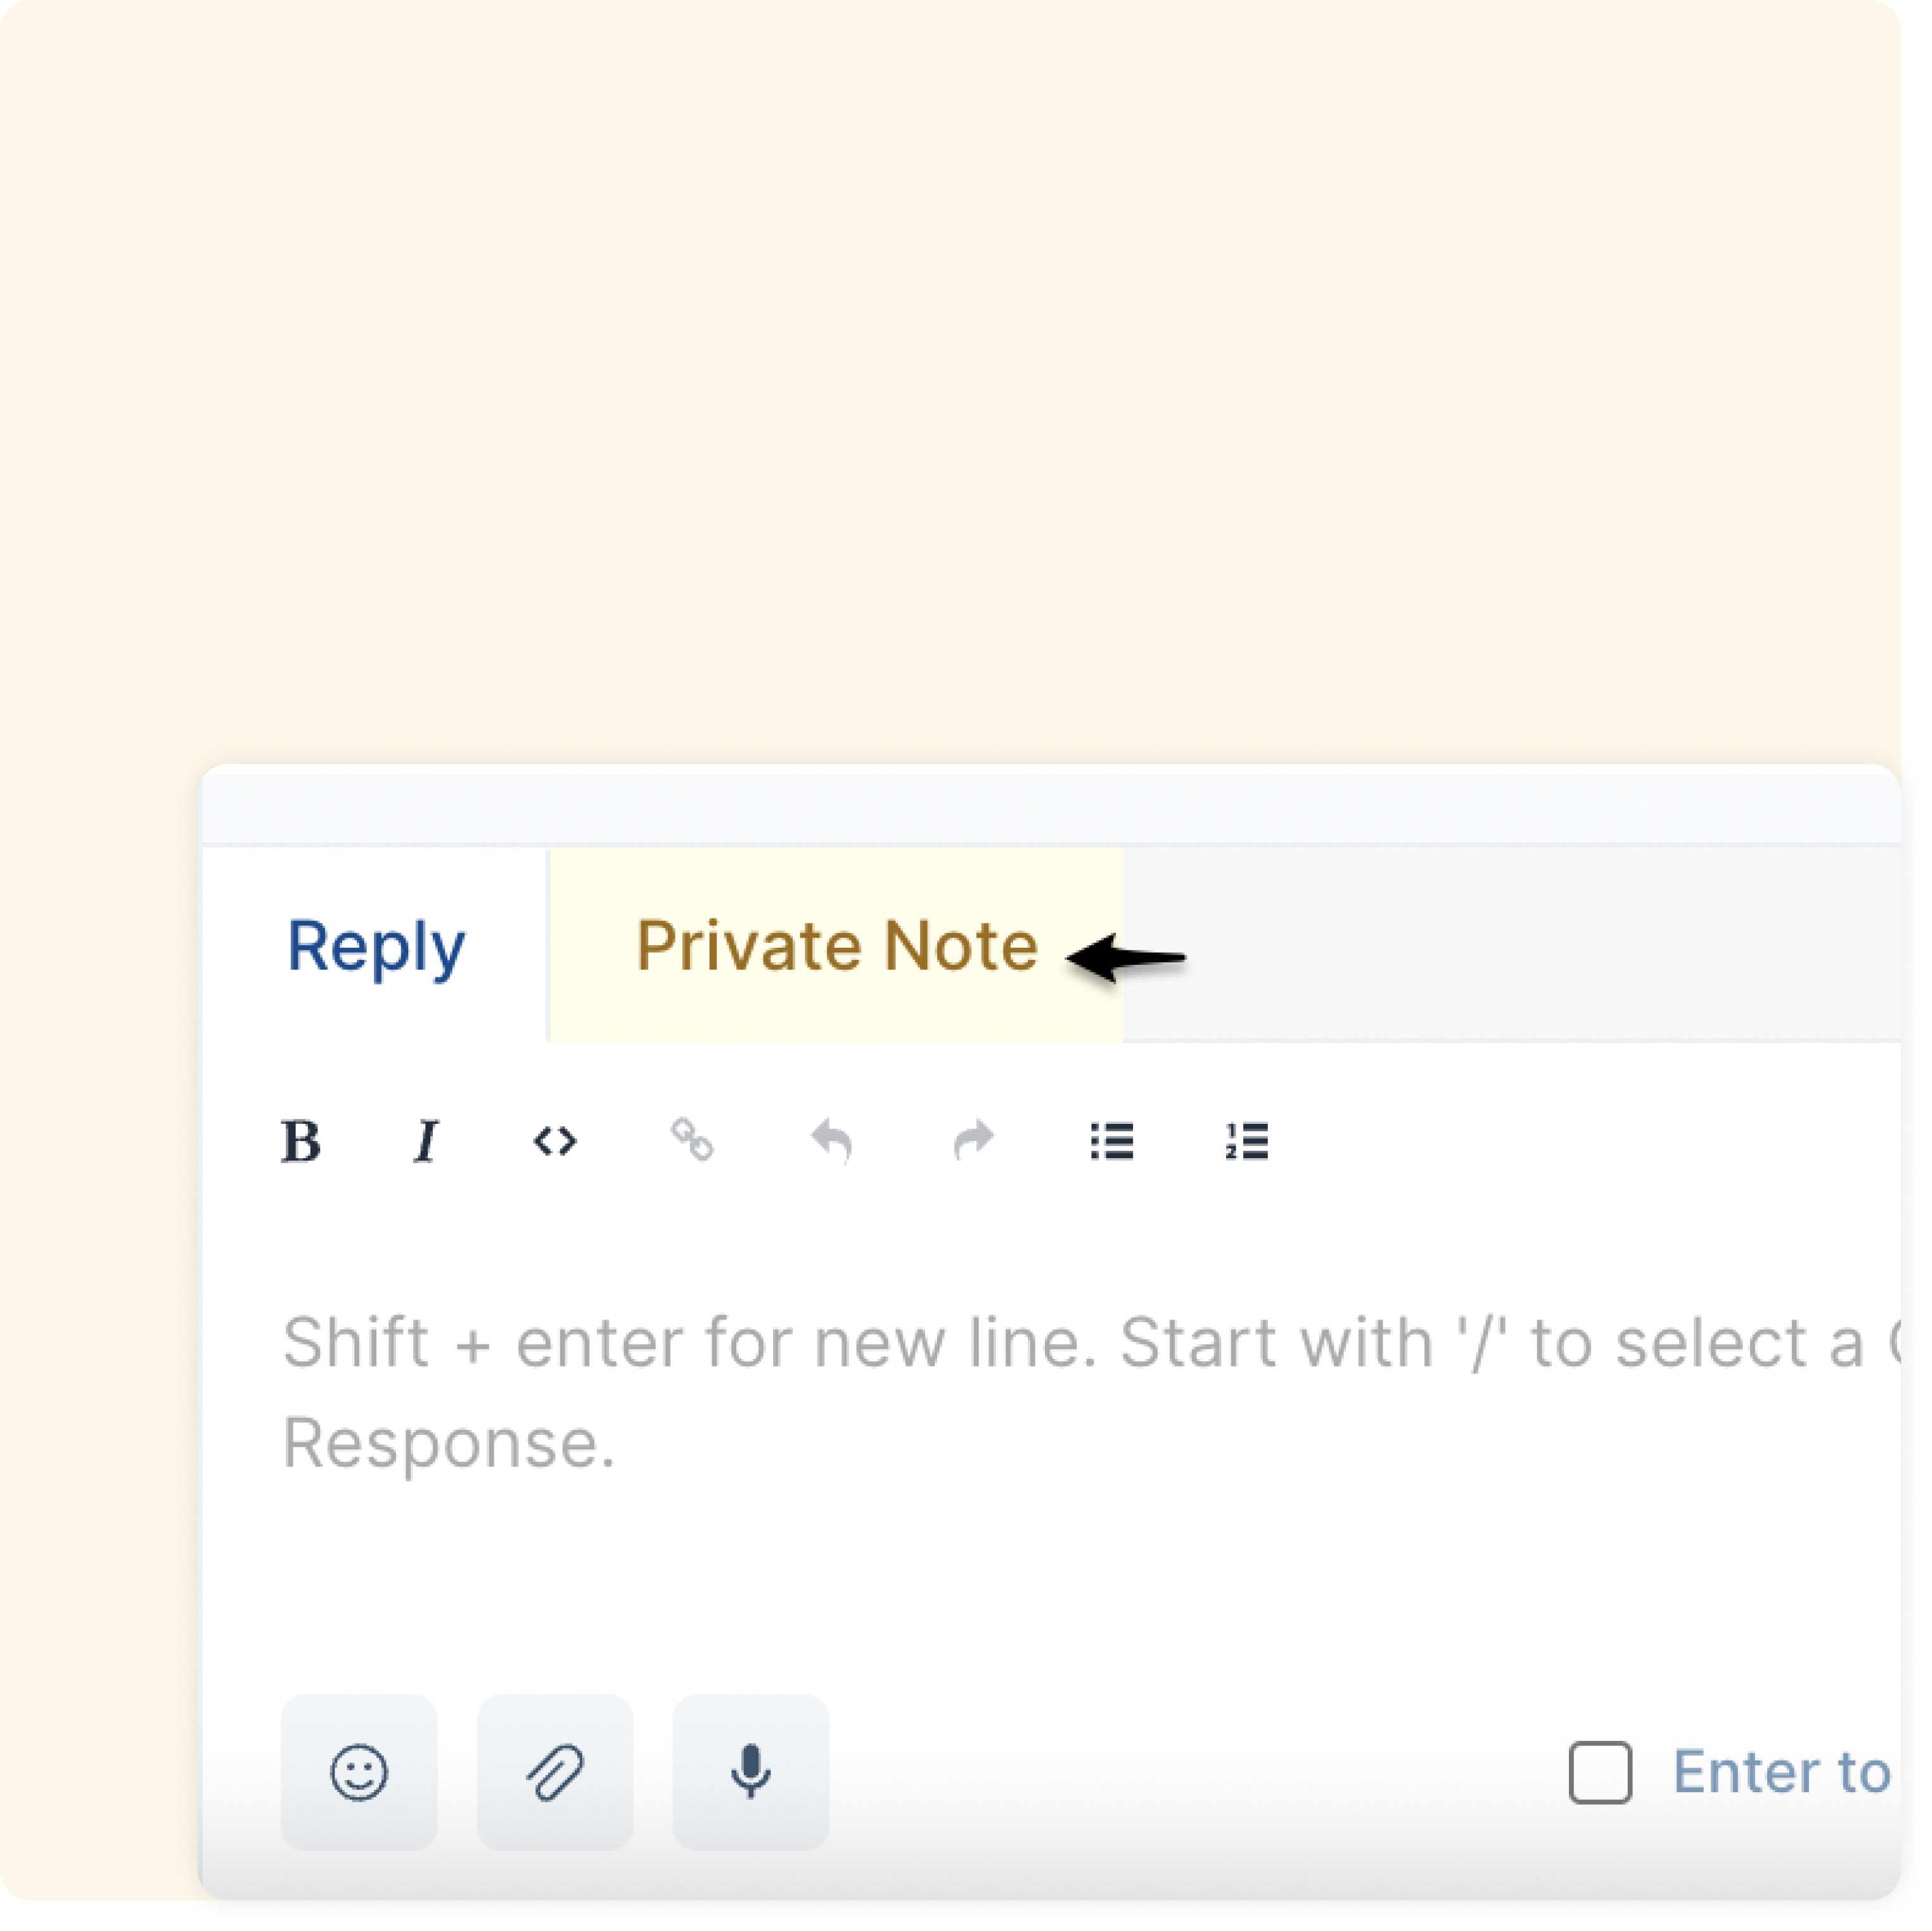 Easily switch from customer chat to Private Note